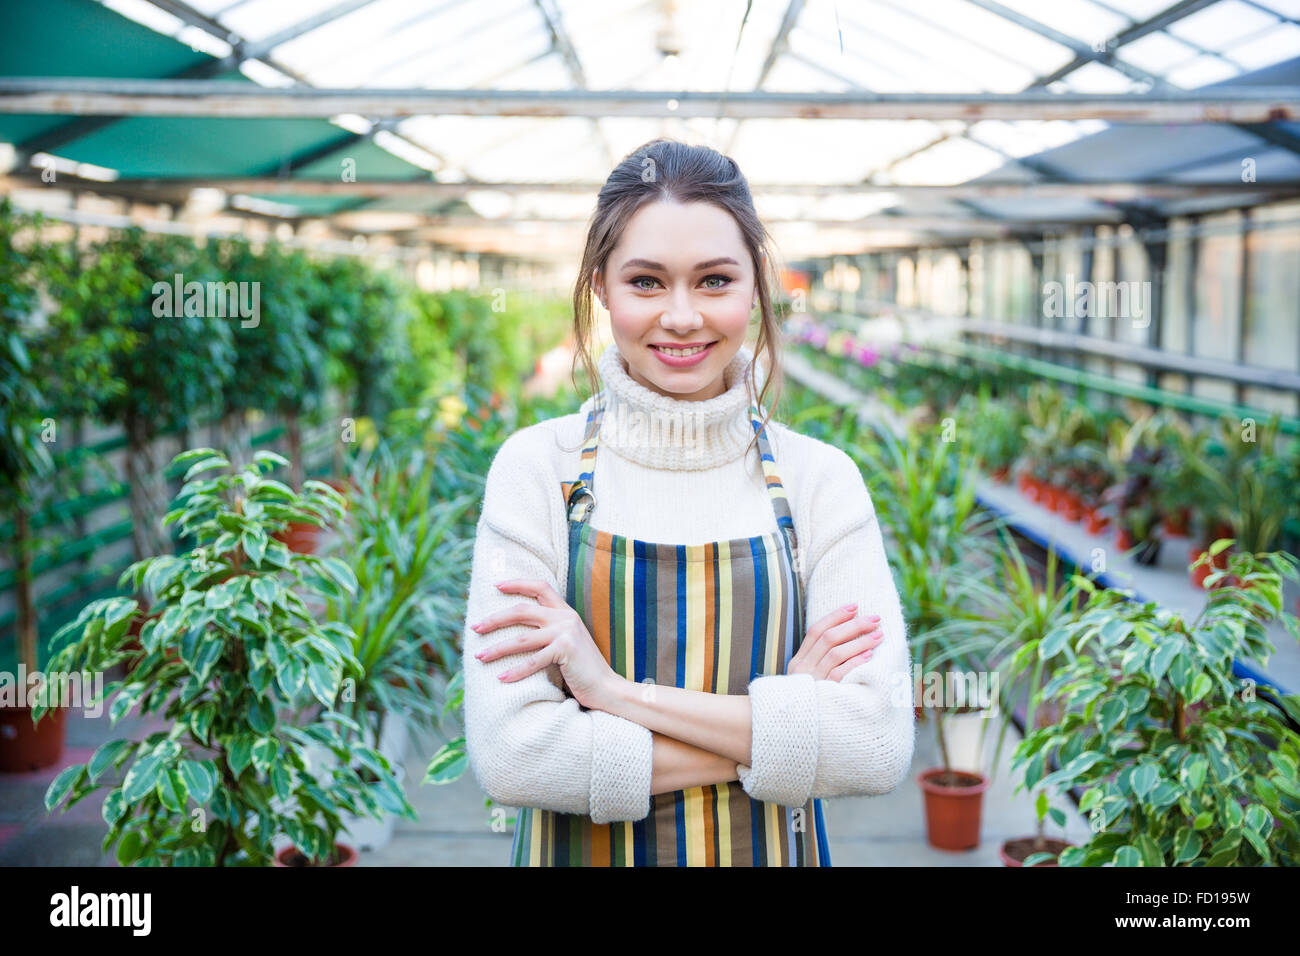 Beautiful happy young woman gardener in white sweater and colorful striped apron standing in orangery Stock Photo